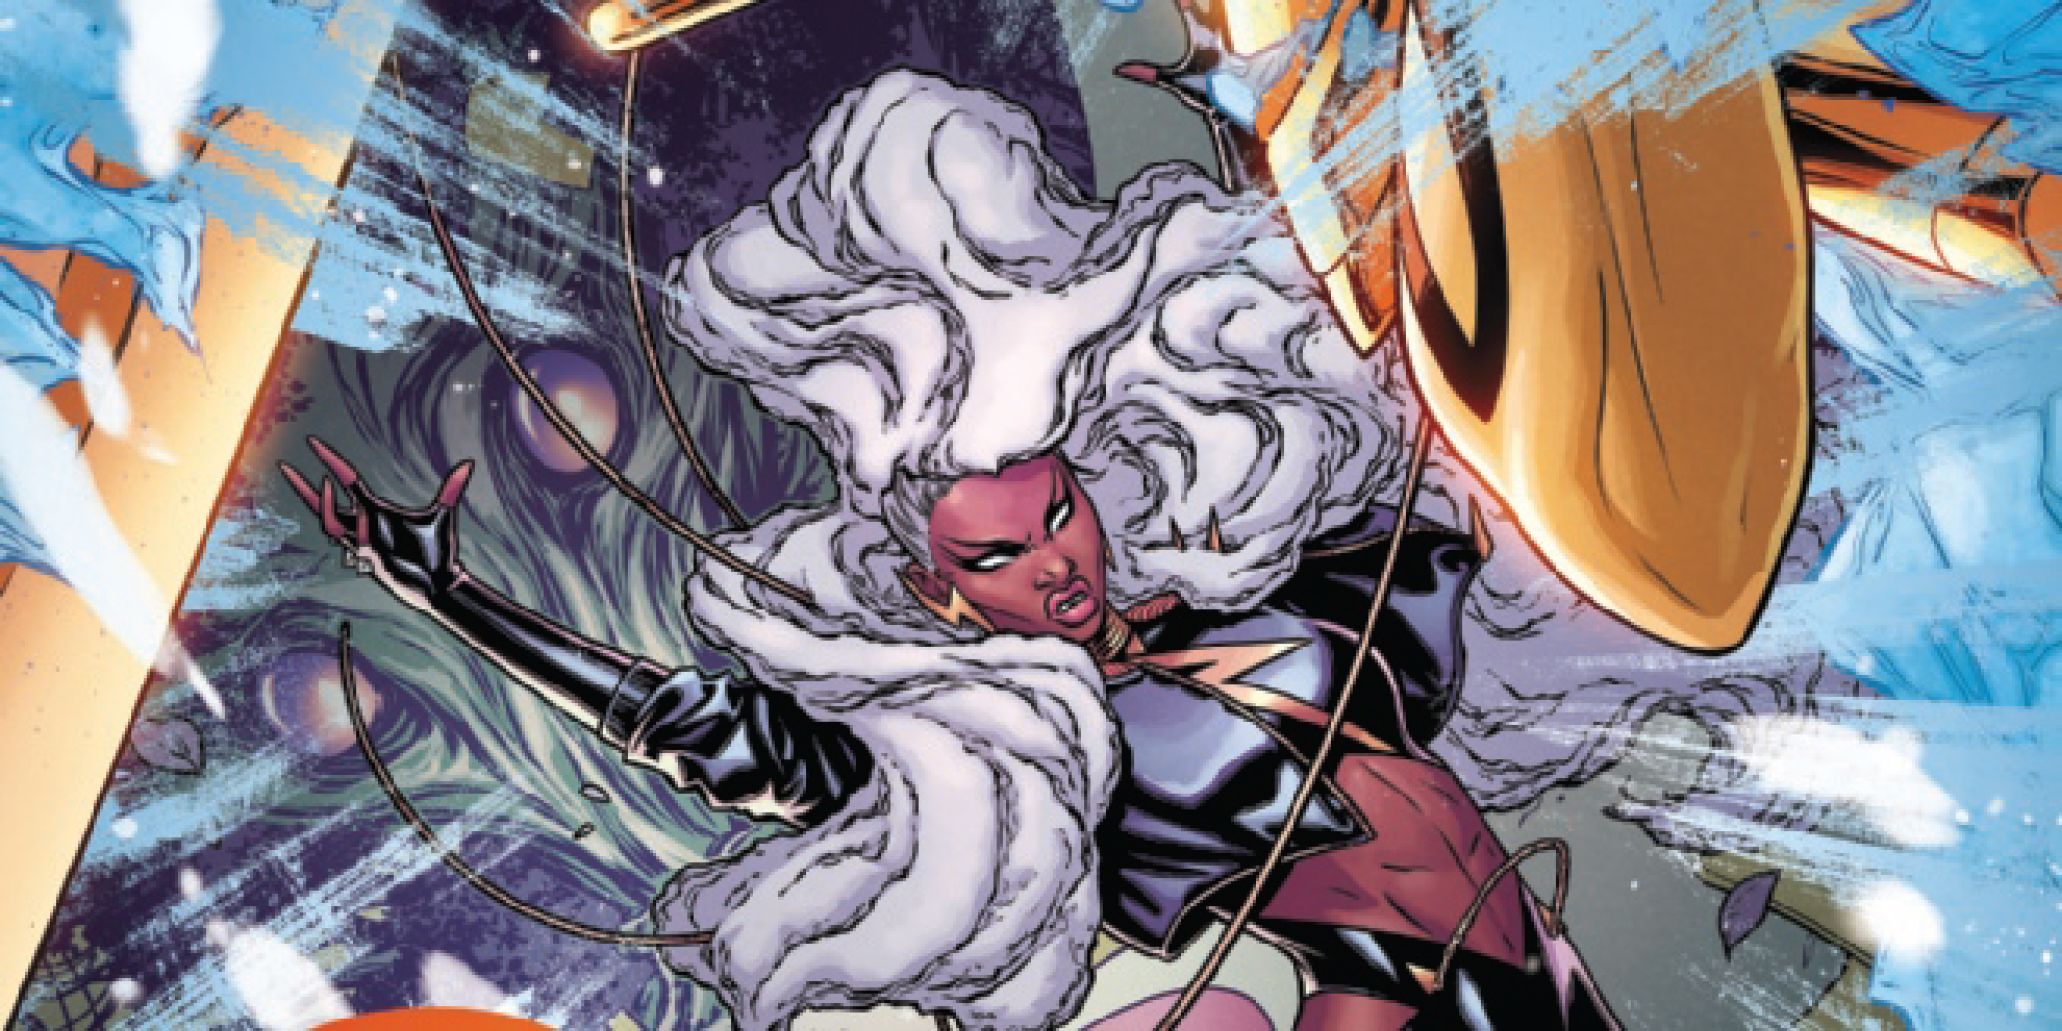 Storm using her powers on Isca the Unbeaten in Marvel Comics' X-Men Red